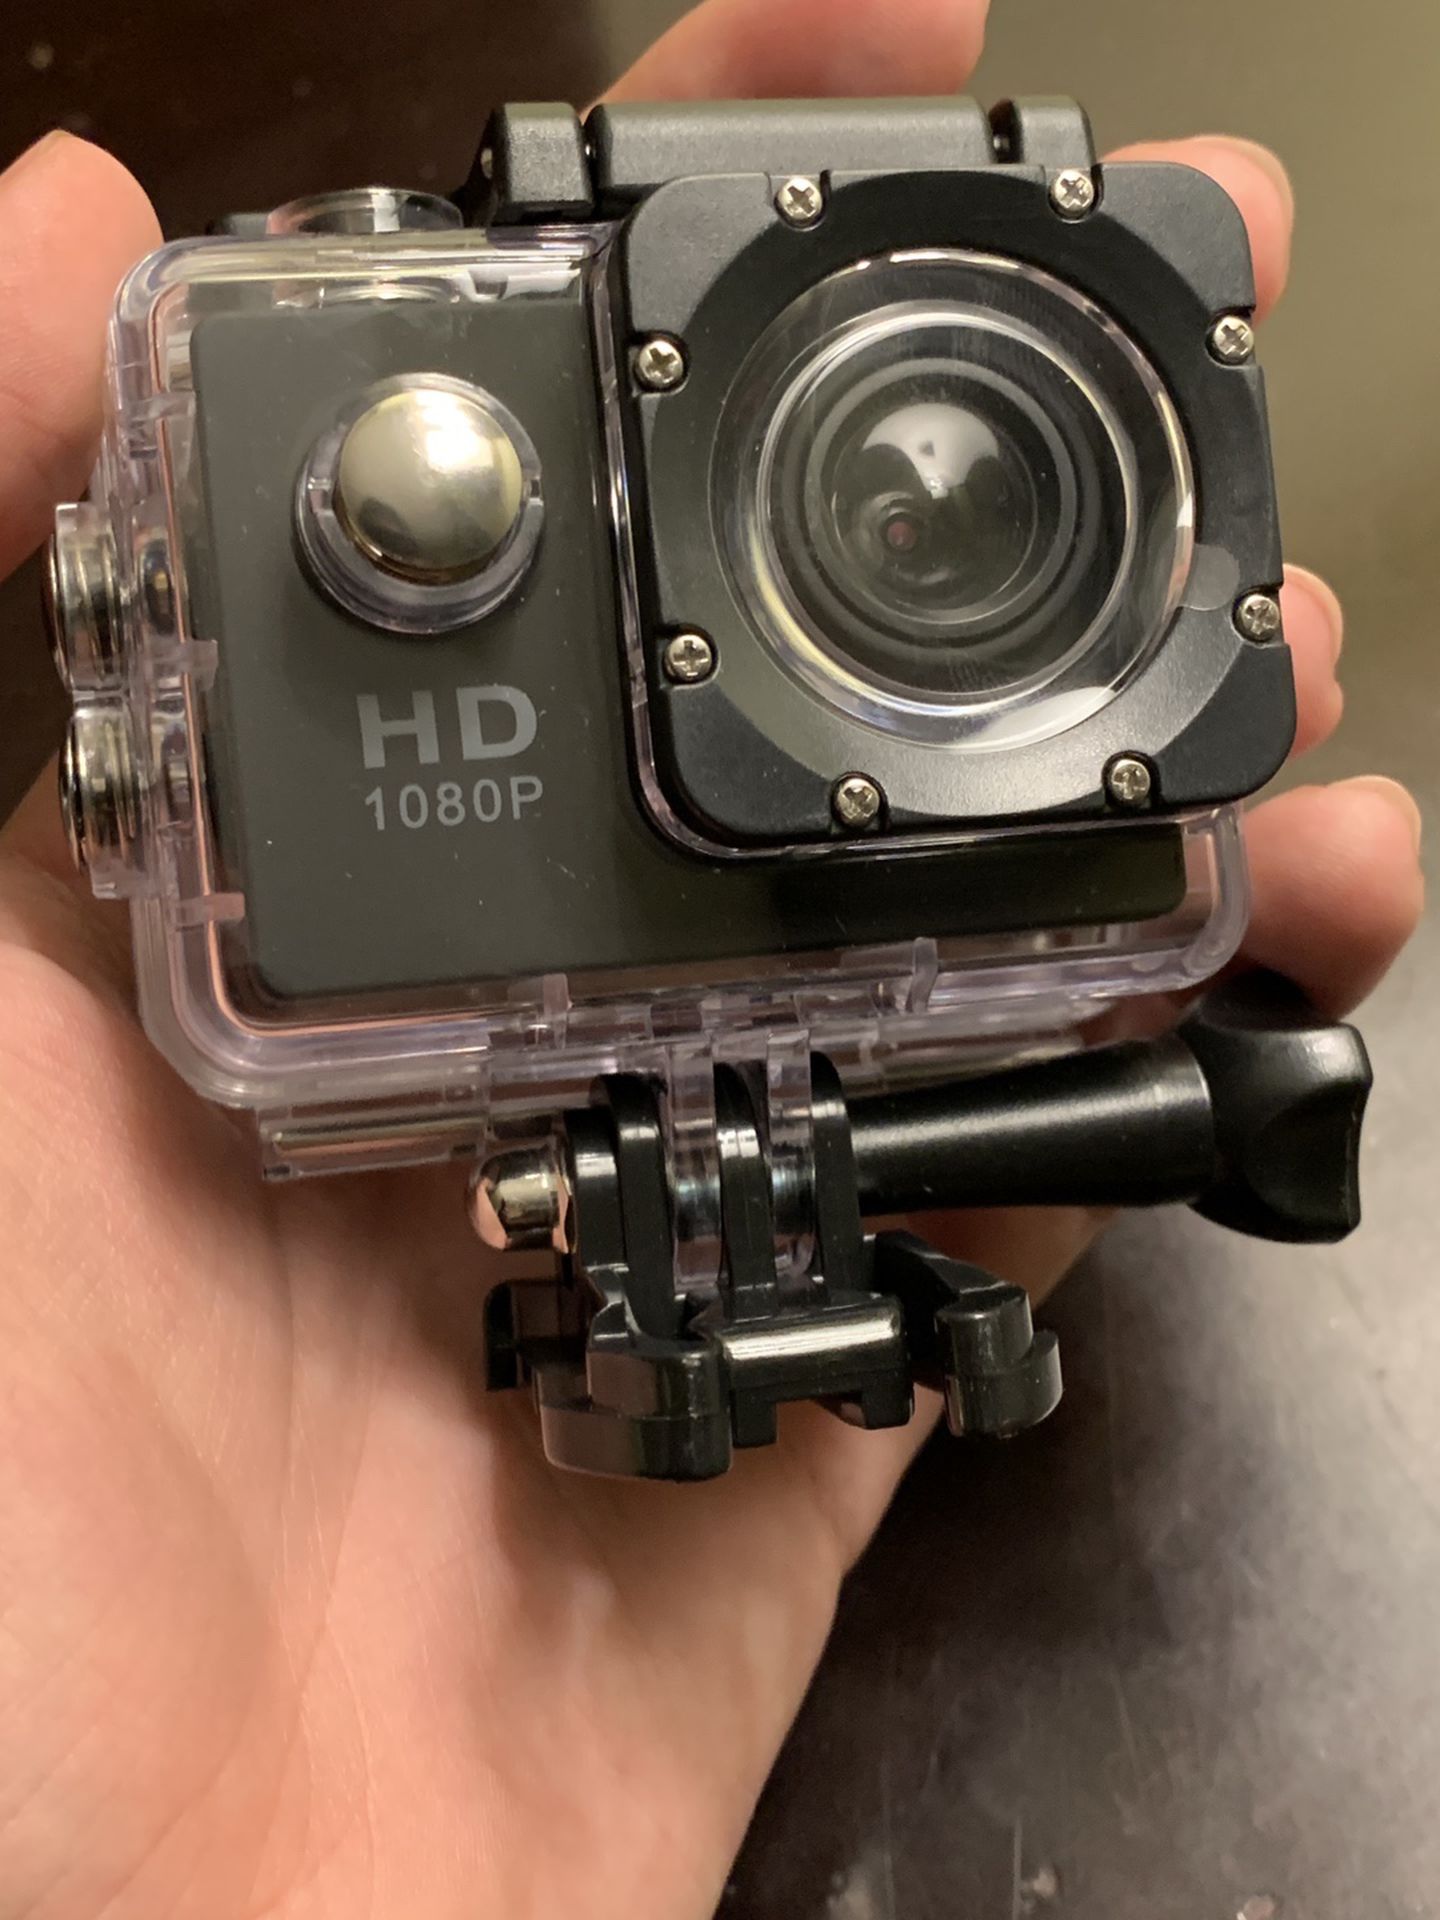 Full HD 1080P Action Camera with all Mounts and Waterproof Material